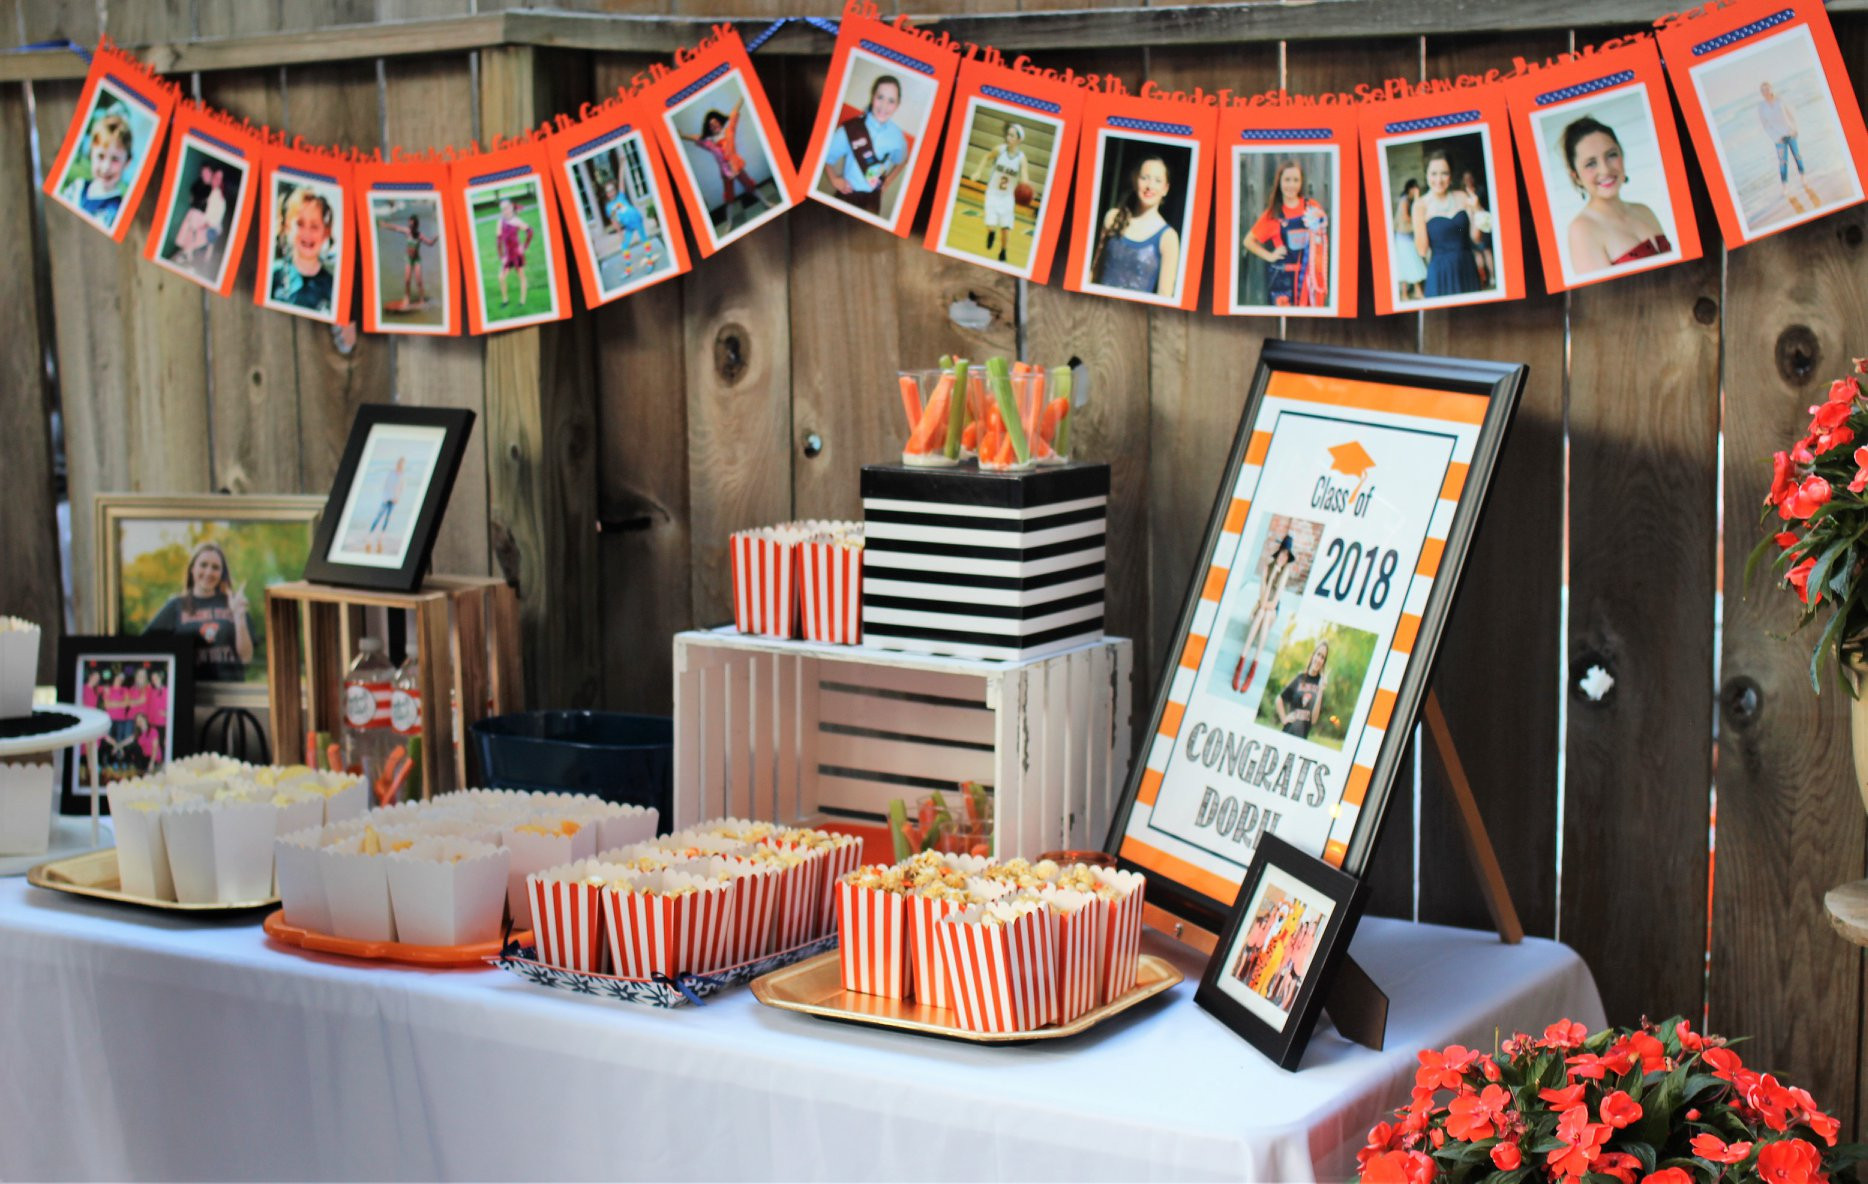 Images Of Graduation Party Ideas
 Graduation Party Ideas How to Celebrate Your Senior s Big Day